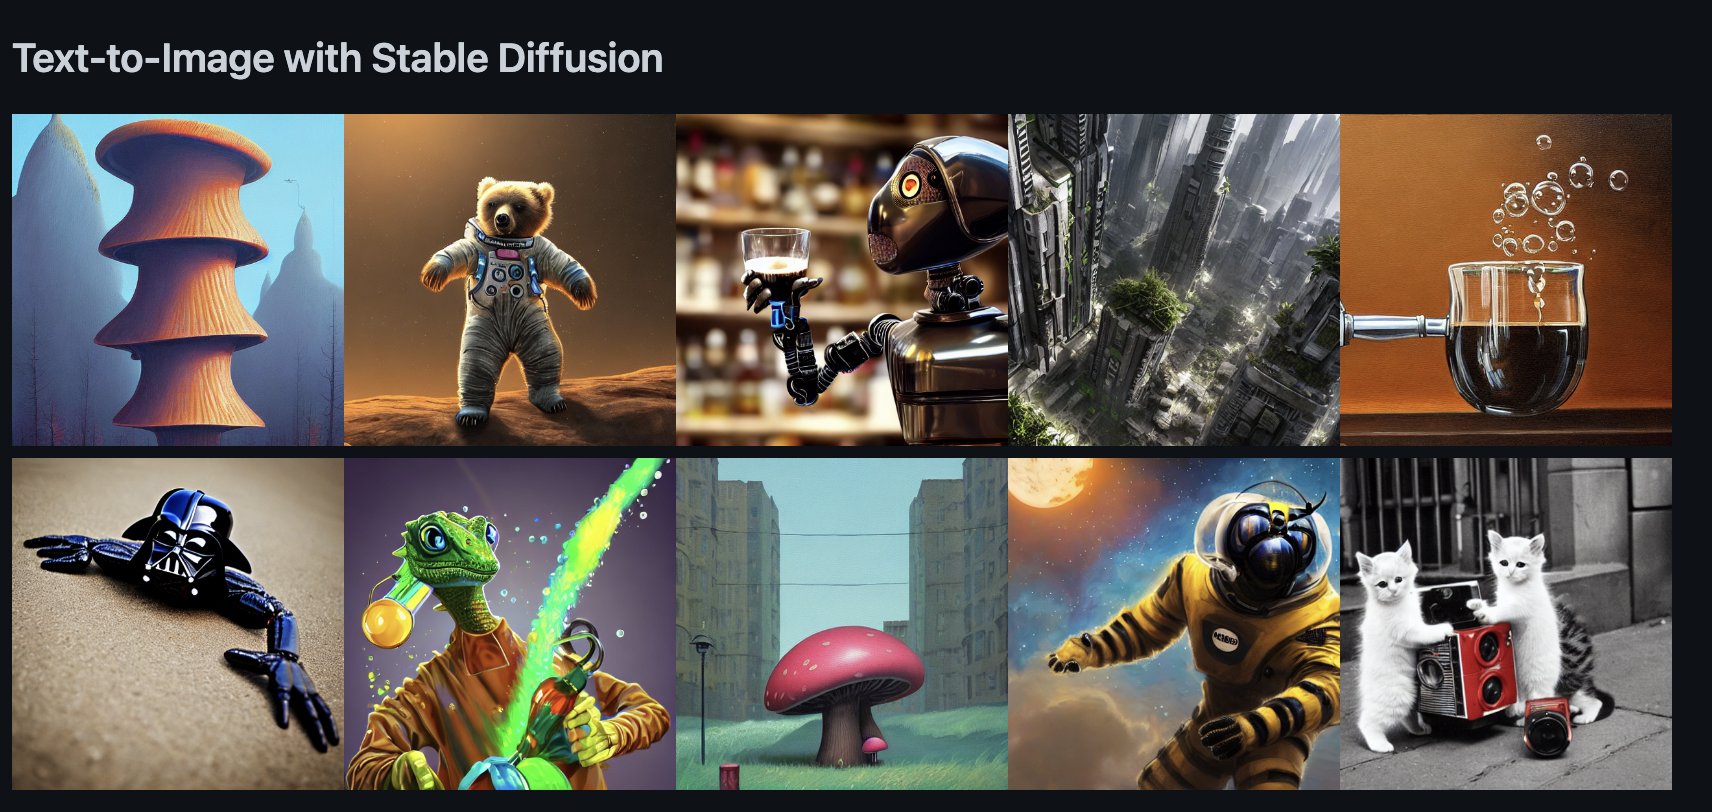 AK on Twitter: "Github for stable diffusion is now public github: https://t.co/MWnMIlua66 https://t.co/COjD3kFrNI" / Twitter